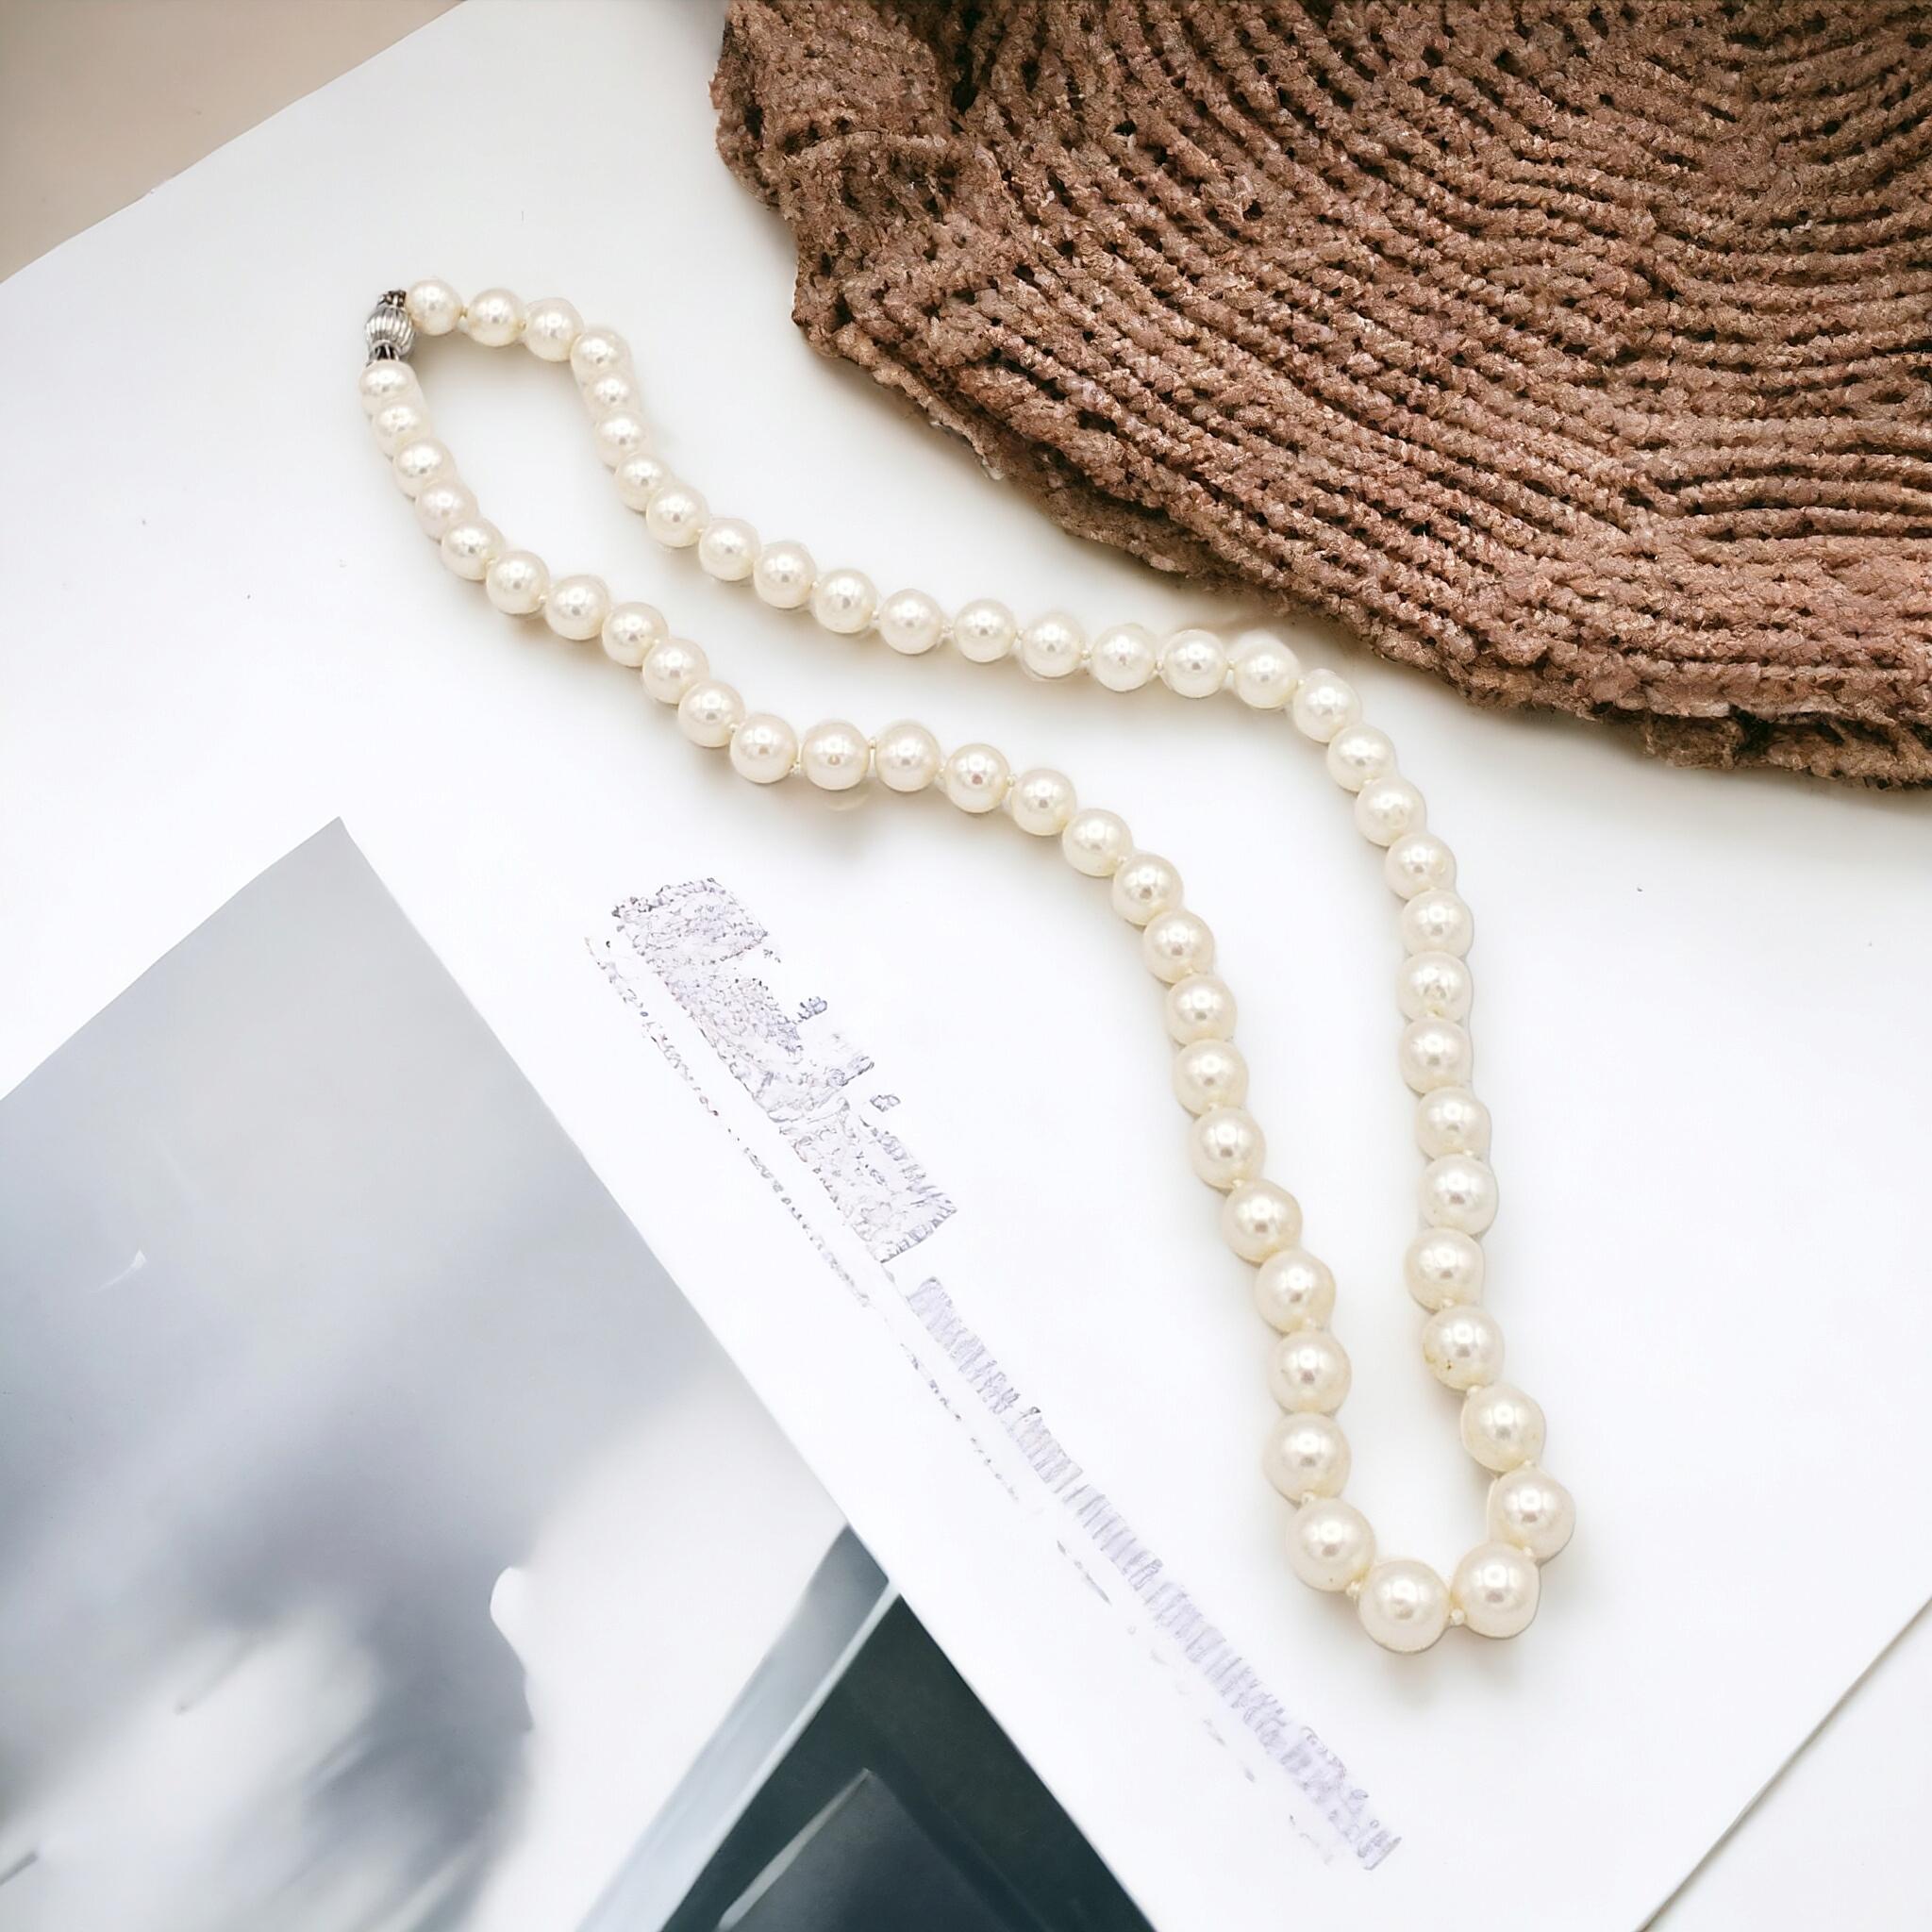 NEW Certified AA+ Quality Japanese Akoya Salt Water White Pearl Necklace For Sale 14